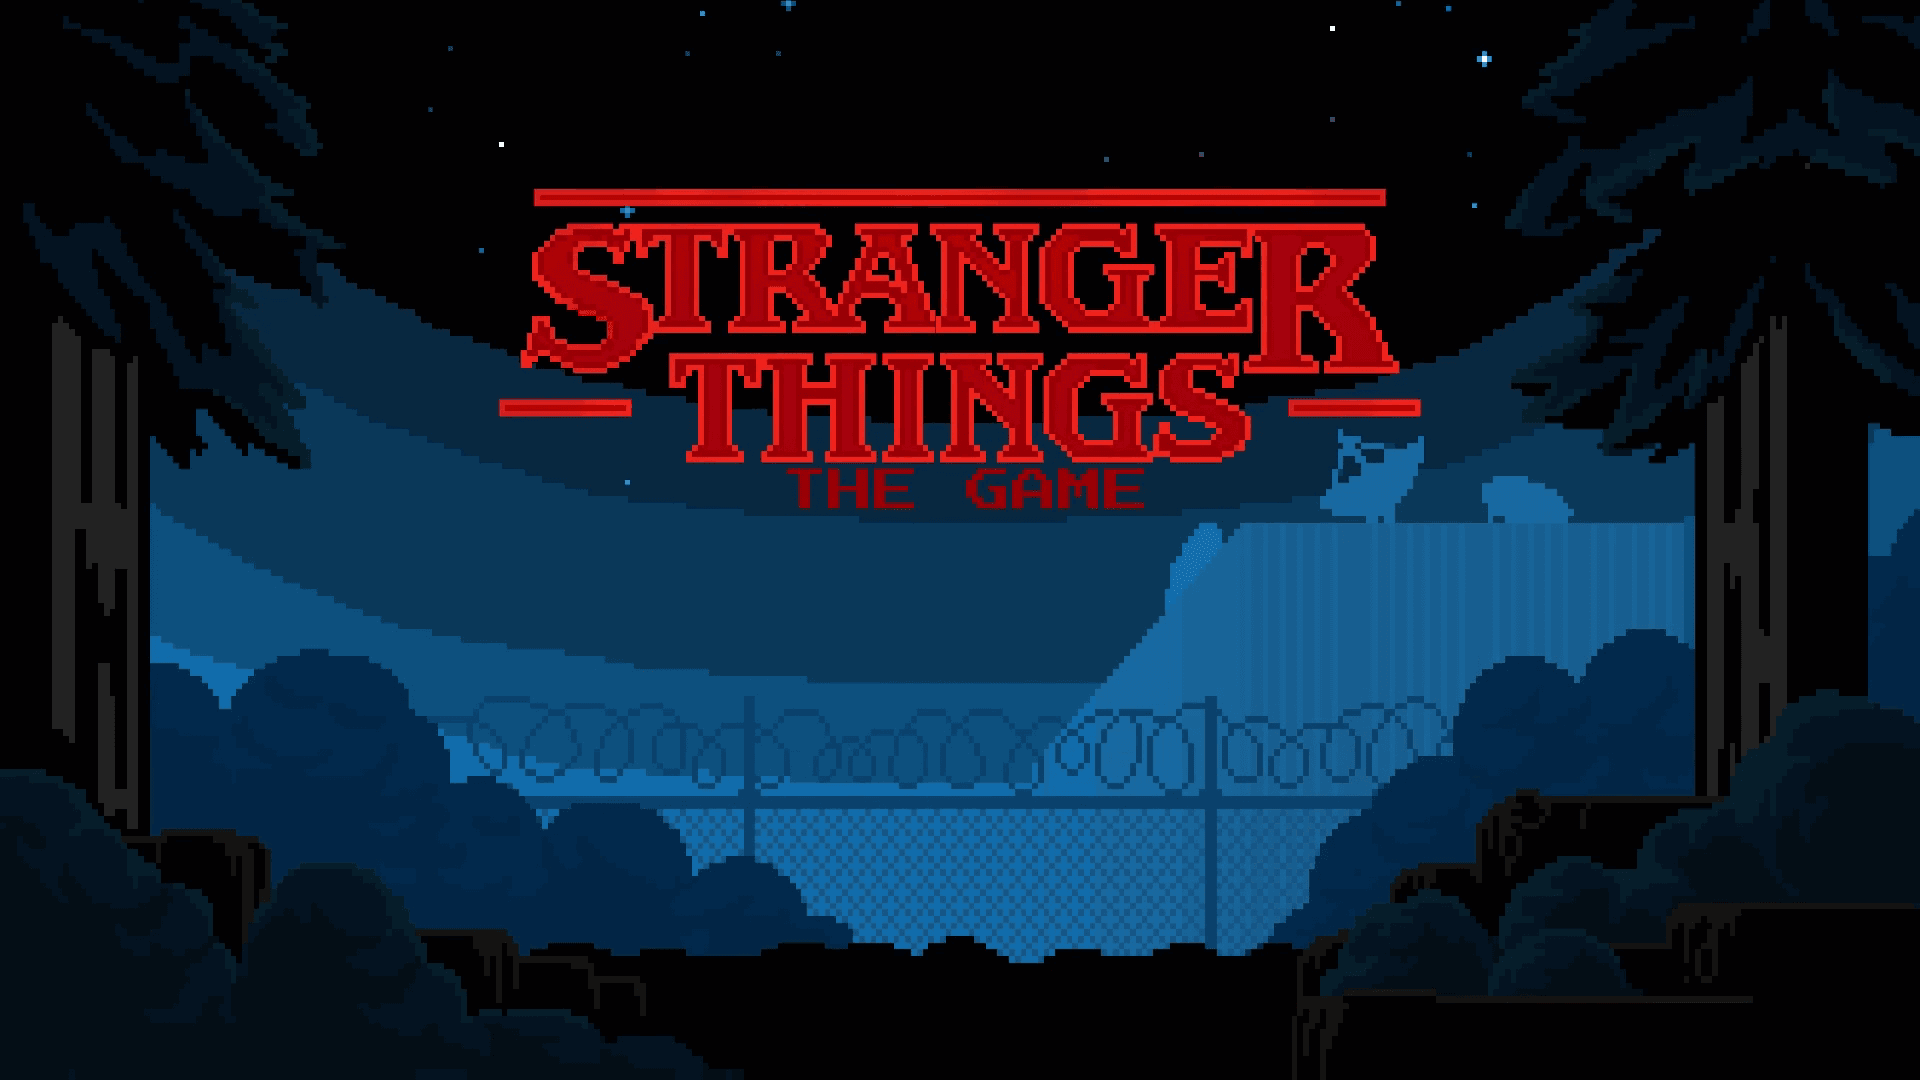 Stranger Things 3 The Game Xbox One Version Full Game Free Download